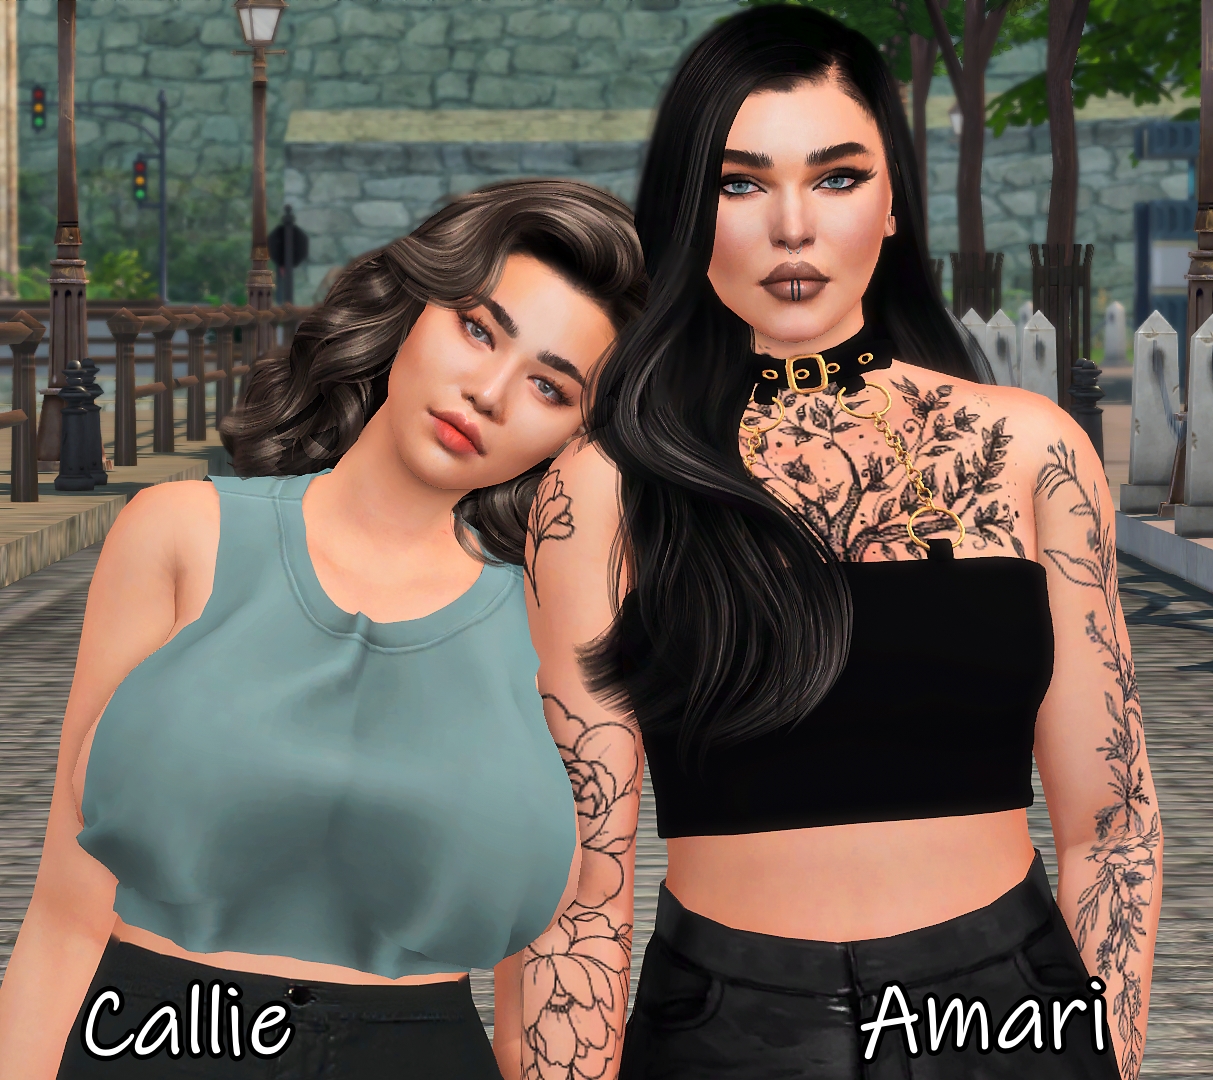 7cupsbobataes Sims Callie And Amari Lesbian Couple Added ♥ 333 Sims 11 May Downloads